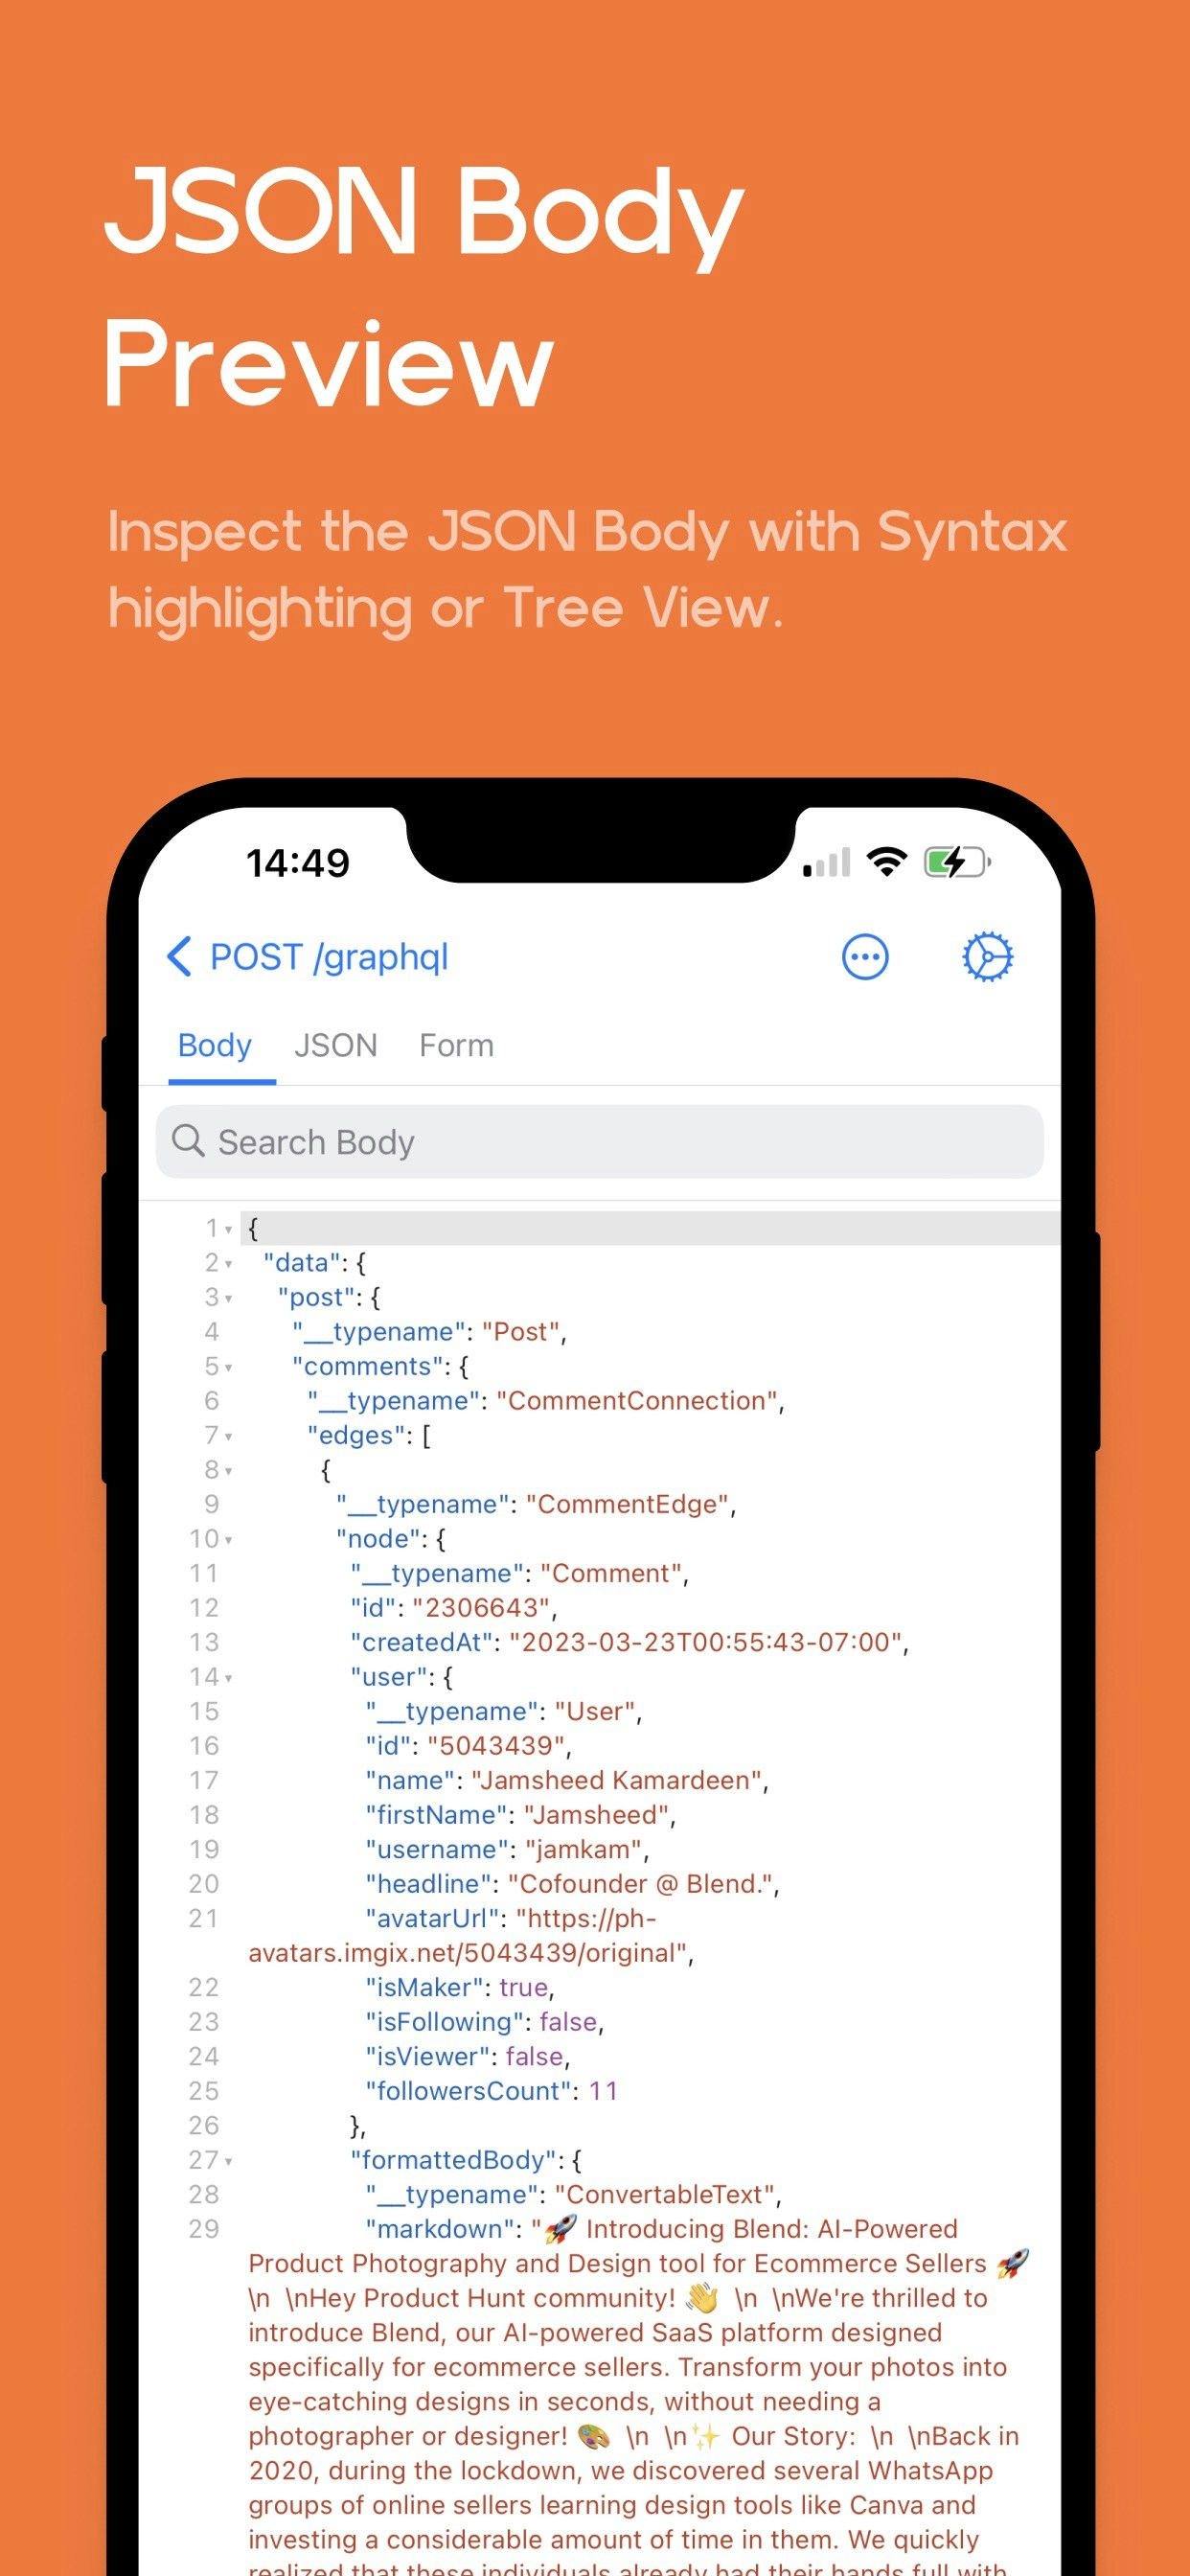 Proxyman for iOS - JSON Body Preview with syntax highlighting